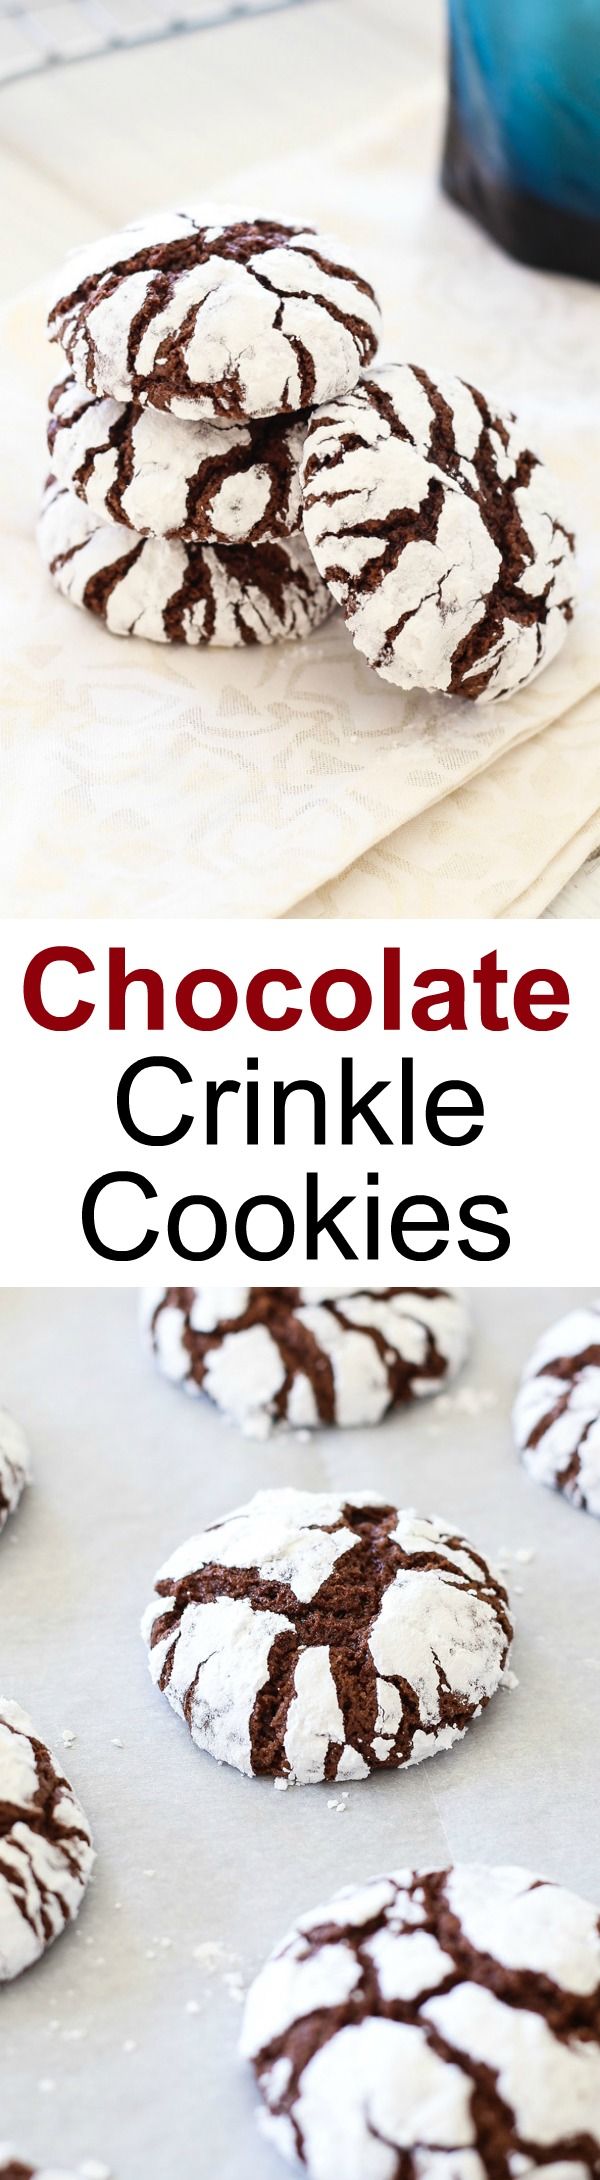 Chocolate Crinkle Cookies - best, homemade, classic Christmas holiday cookies recipe! Sweet, fudgy and loaded with cocoa and sugar | rasamalaysia.com